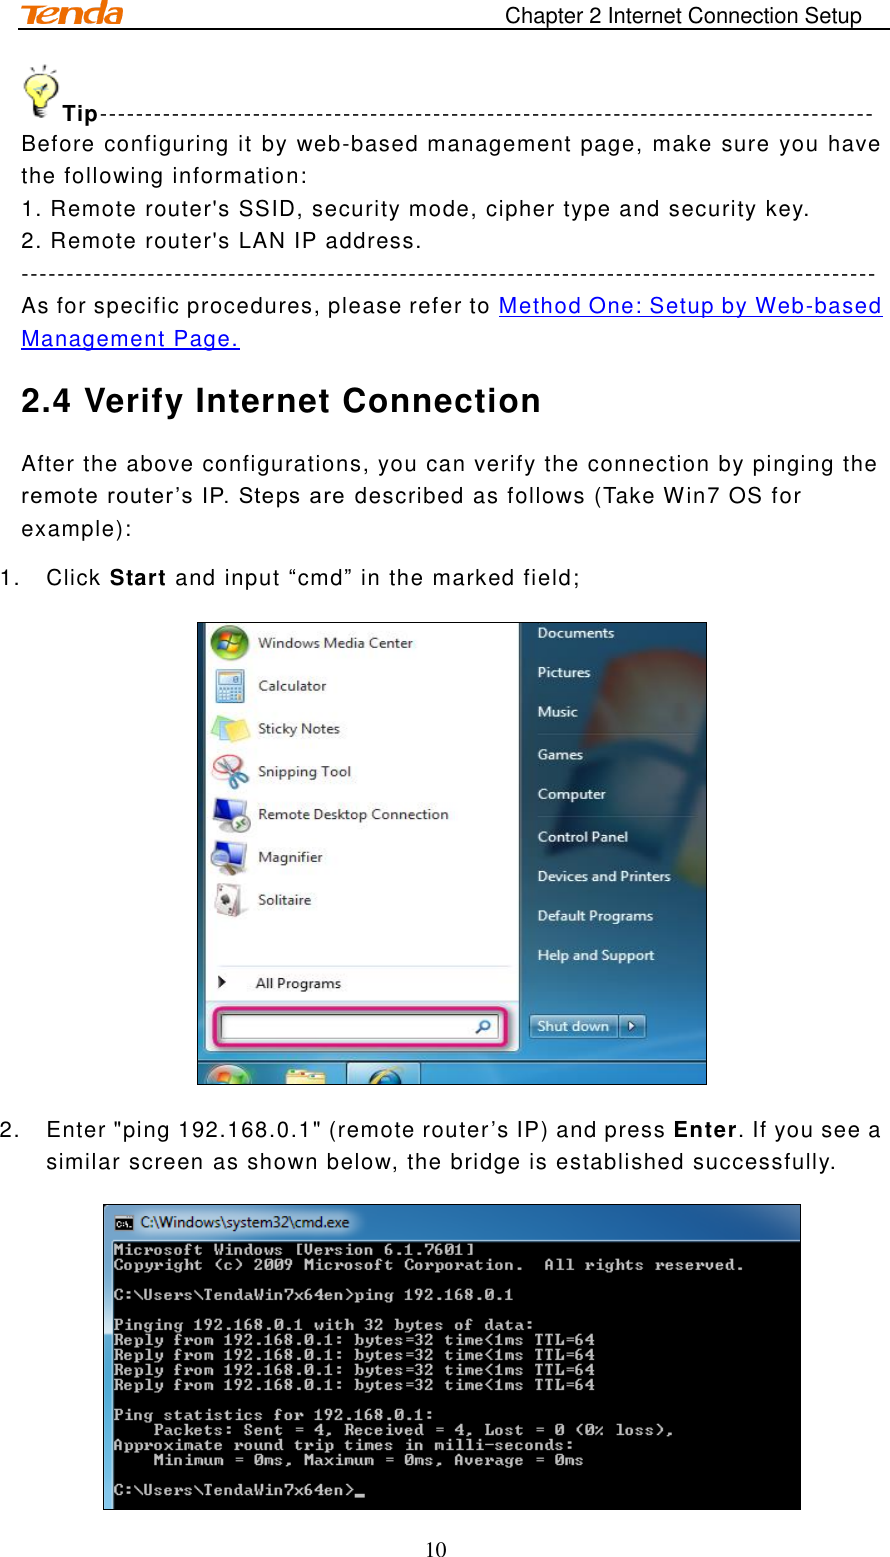                                                                       Chapter 2 Internet Connection Setup 10 Tip-------------------------------------------------------------------------------------- Before configuring it by web-based management page, make sure you have the following information: 1. Remote router&apos;s SSID, security mode, cipher type and security key.  2. Remote router&apos;s LAN IP address. ----------------------------------------------------------------------------------------------- As for specific procedures, please refer to Method One: Setup by Web-based Management Page. 2.4 Verify Internet Connection After the above configurations, you can verify the connection by pinging the remote router ’s IP. Steps are  described as follows (Take Win7 OS for example): 1.  Click Start and input “cmd” in the marked field;  2.  Enter &quot;ping 192.168.0.1&quot; (remote router’s IP) and press Enter. If you see a similar screen as shown below, the bridge is established successfully.  